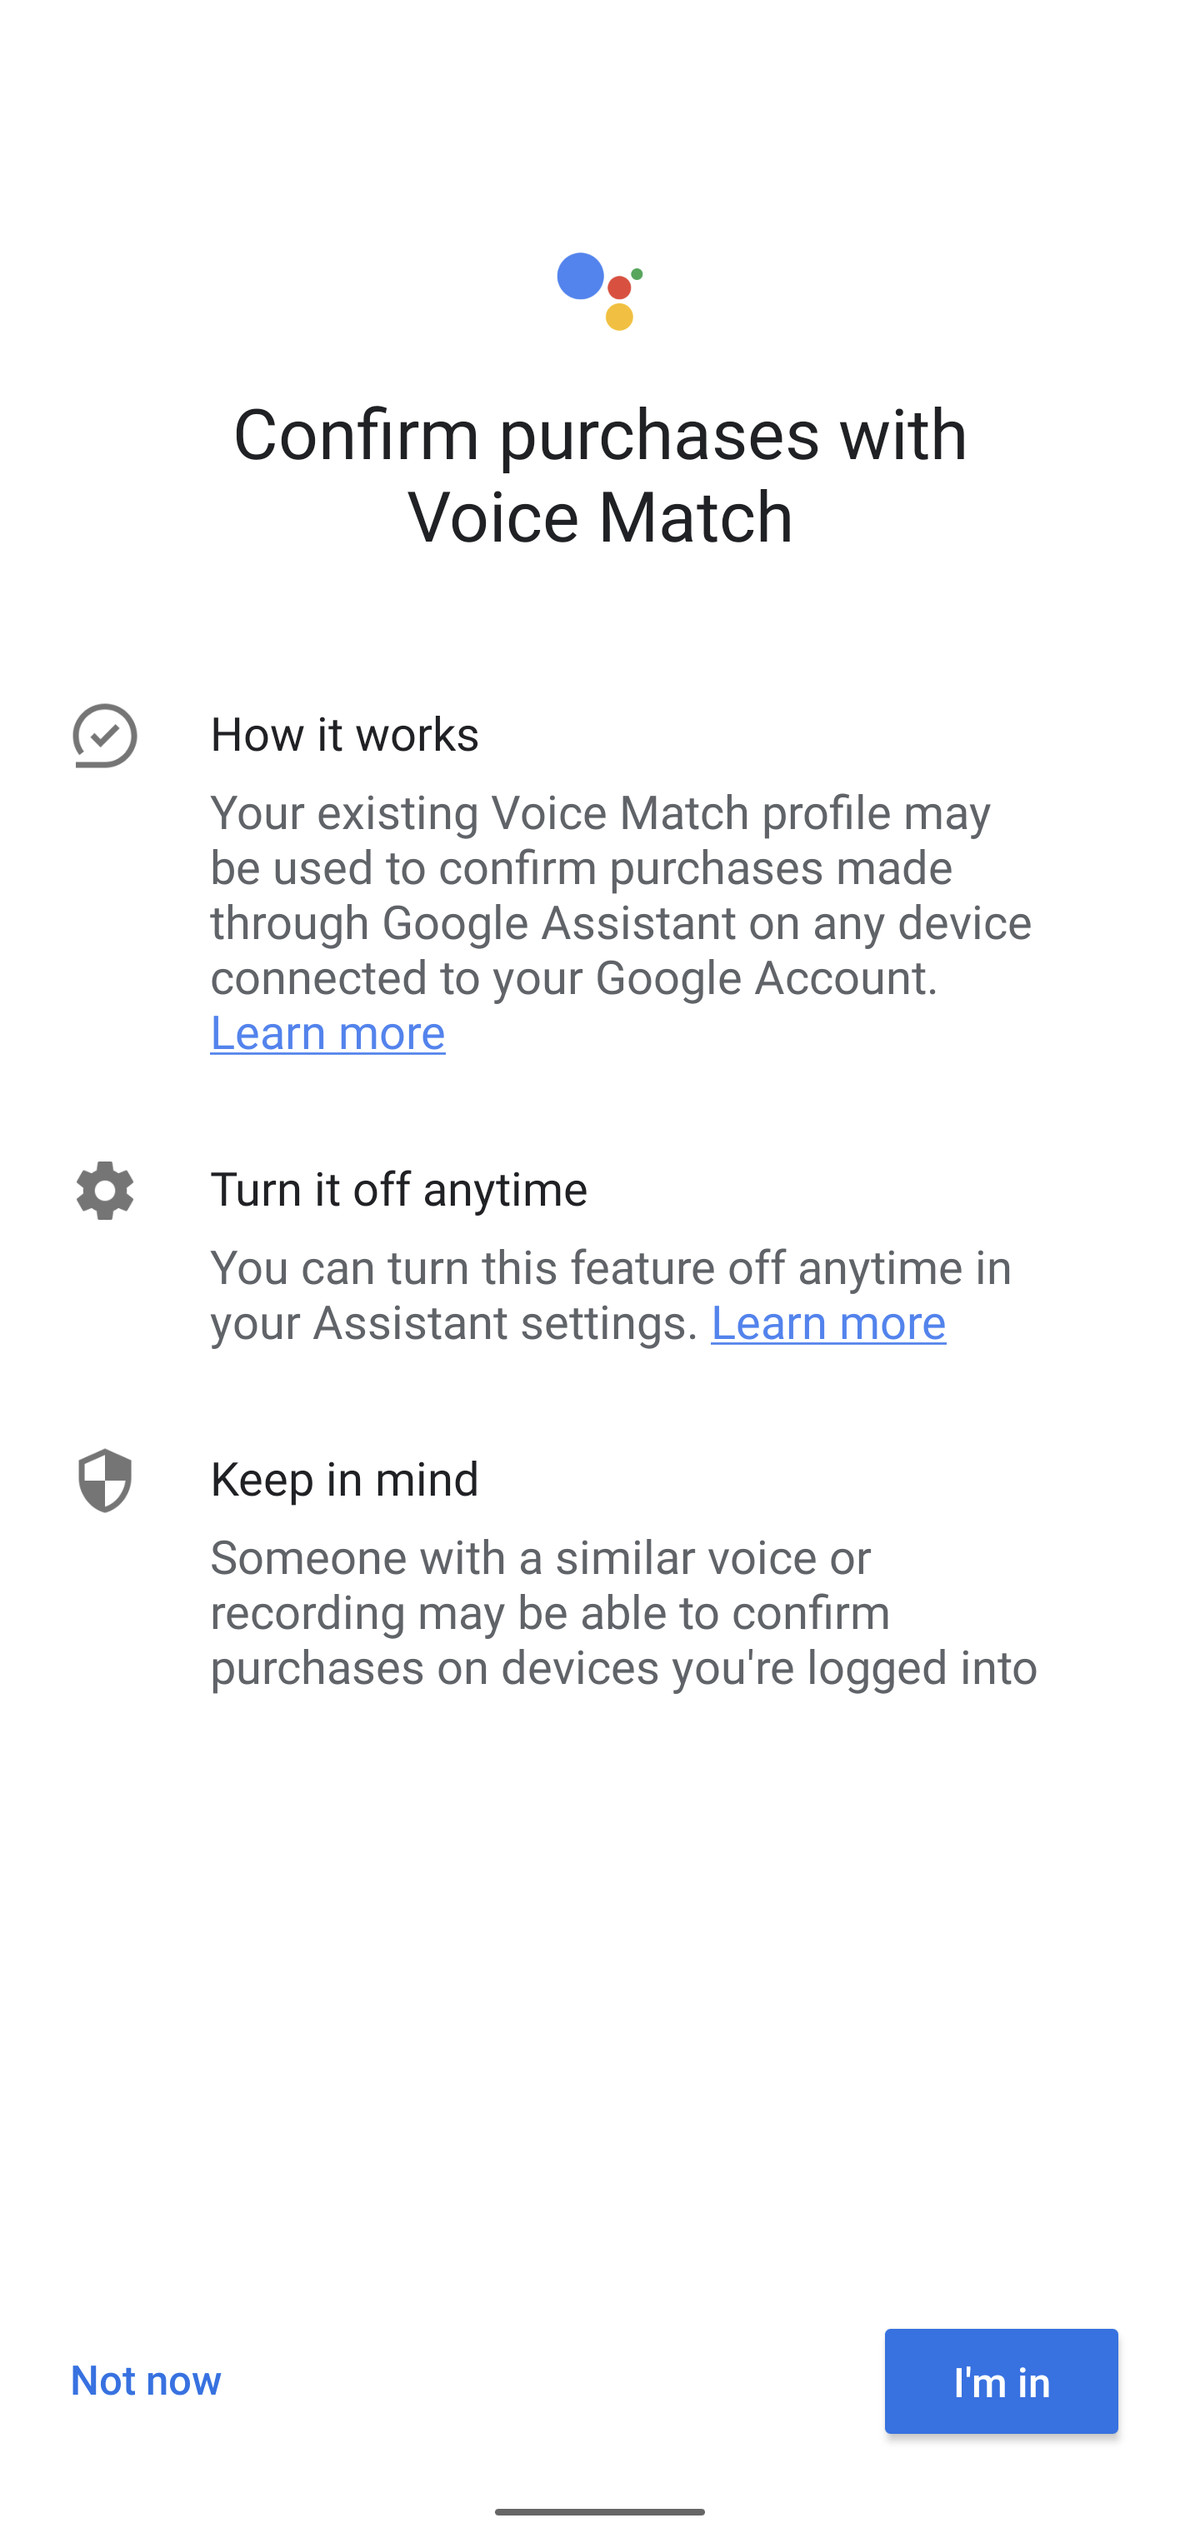 Google Tests Voice Matching To Secure Google Assistant Purchases Wilson S Media - how to get free robux no human verification test iq medium